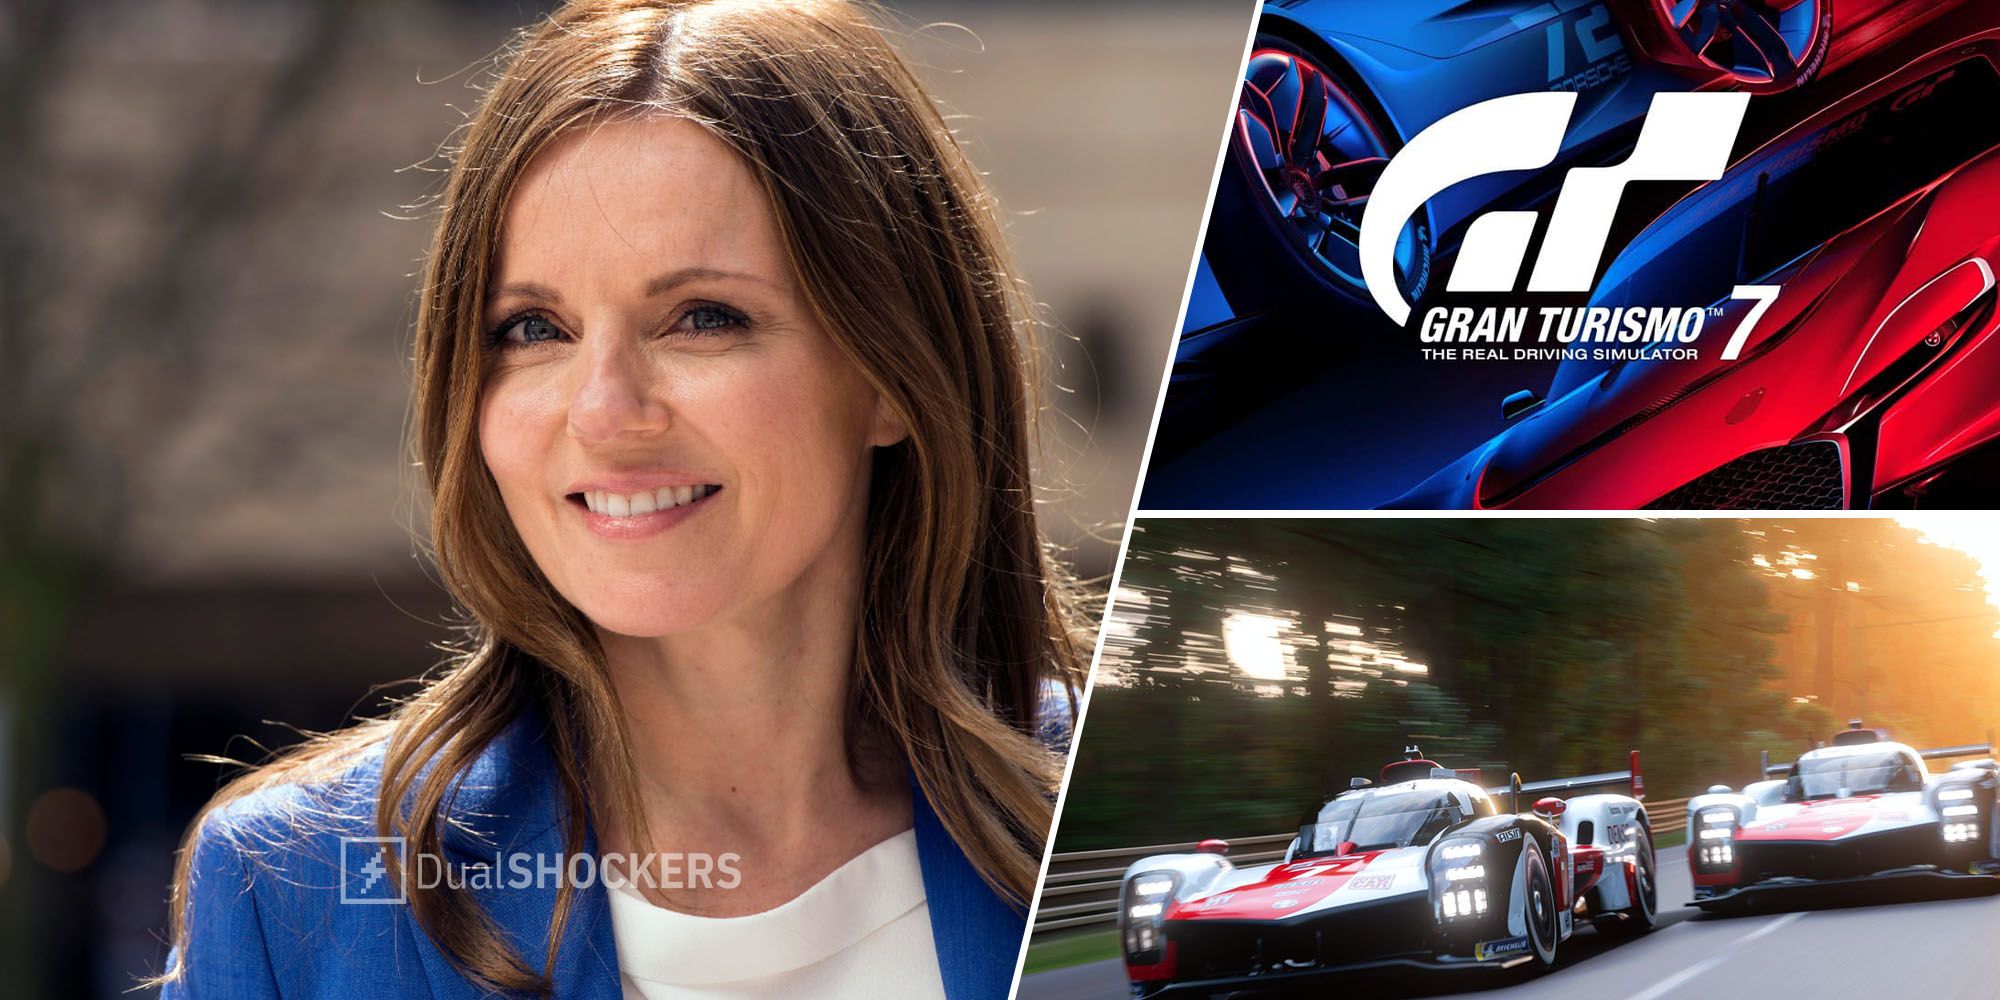 A Geri Halliwell-Horner photo with screenshots from Gran Turismo 7